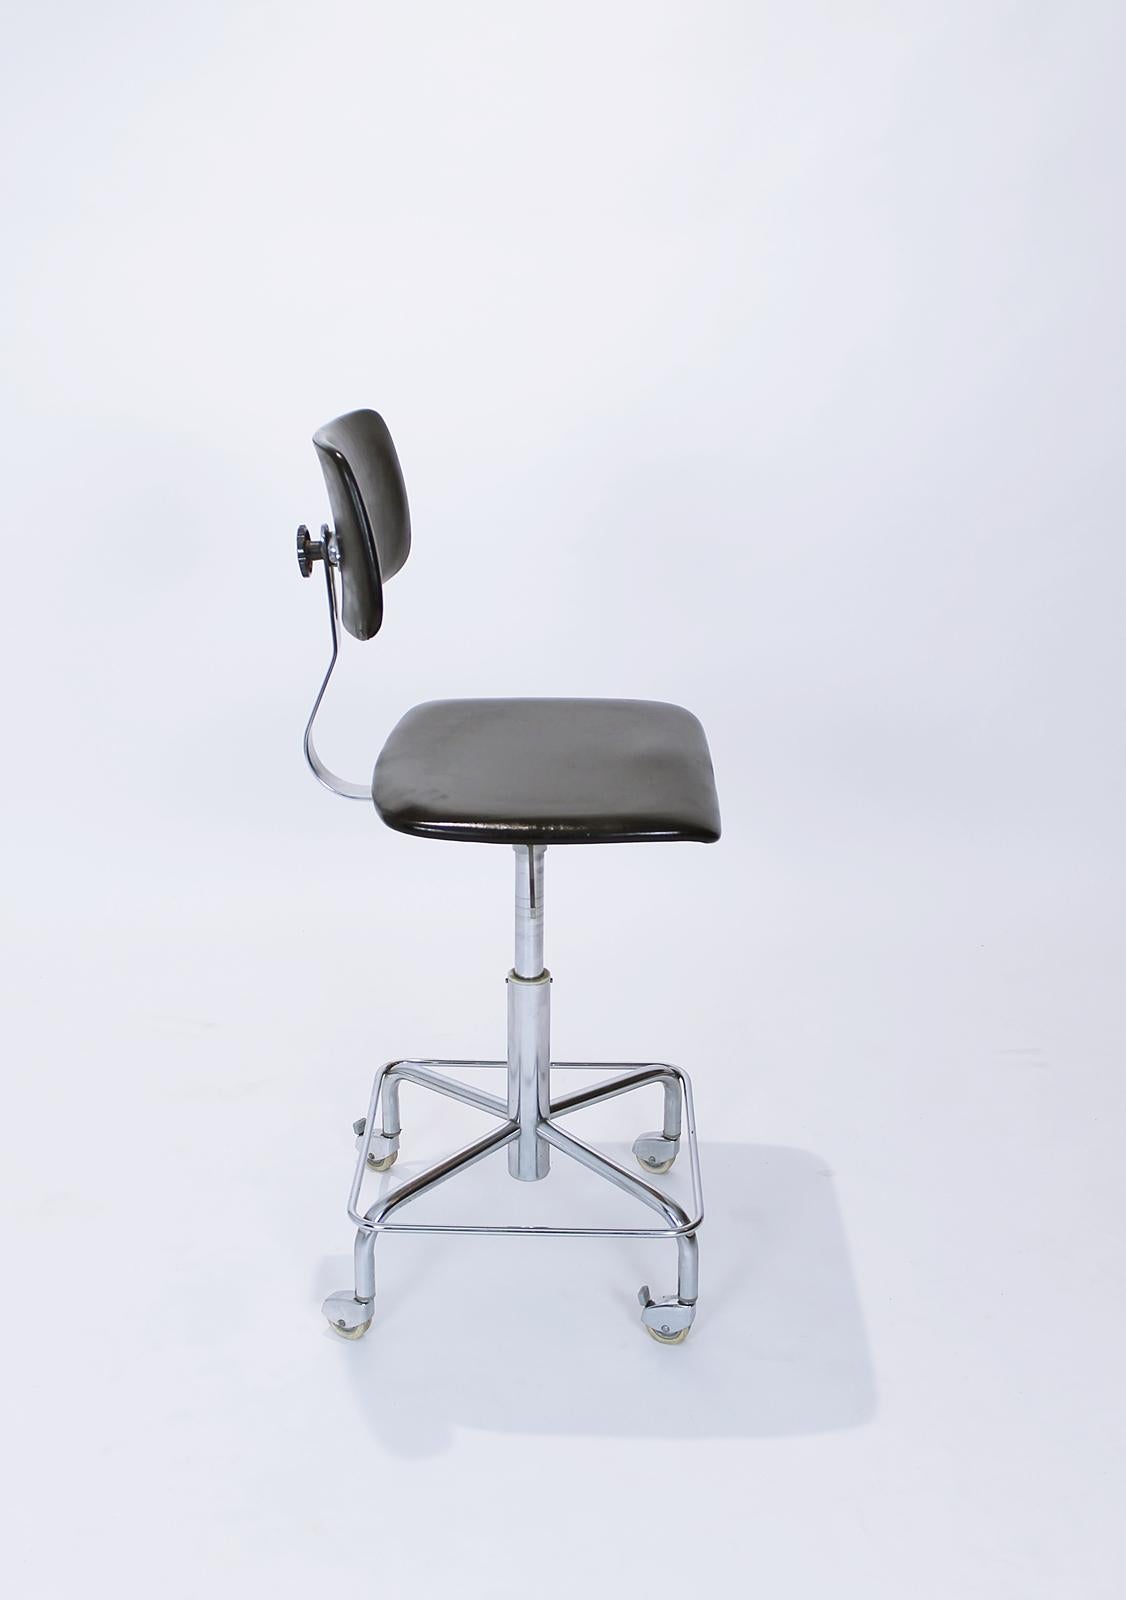 Vintage mid century rolling desk swivel chair by Bremshey, Germany.
This chair has a chromed steel frame, the back and seat are black vinyl.
The chair is height adjustable with gas spring.
The chromed metal frame has four wheels with Haco parking